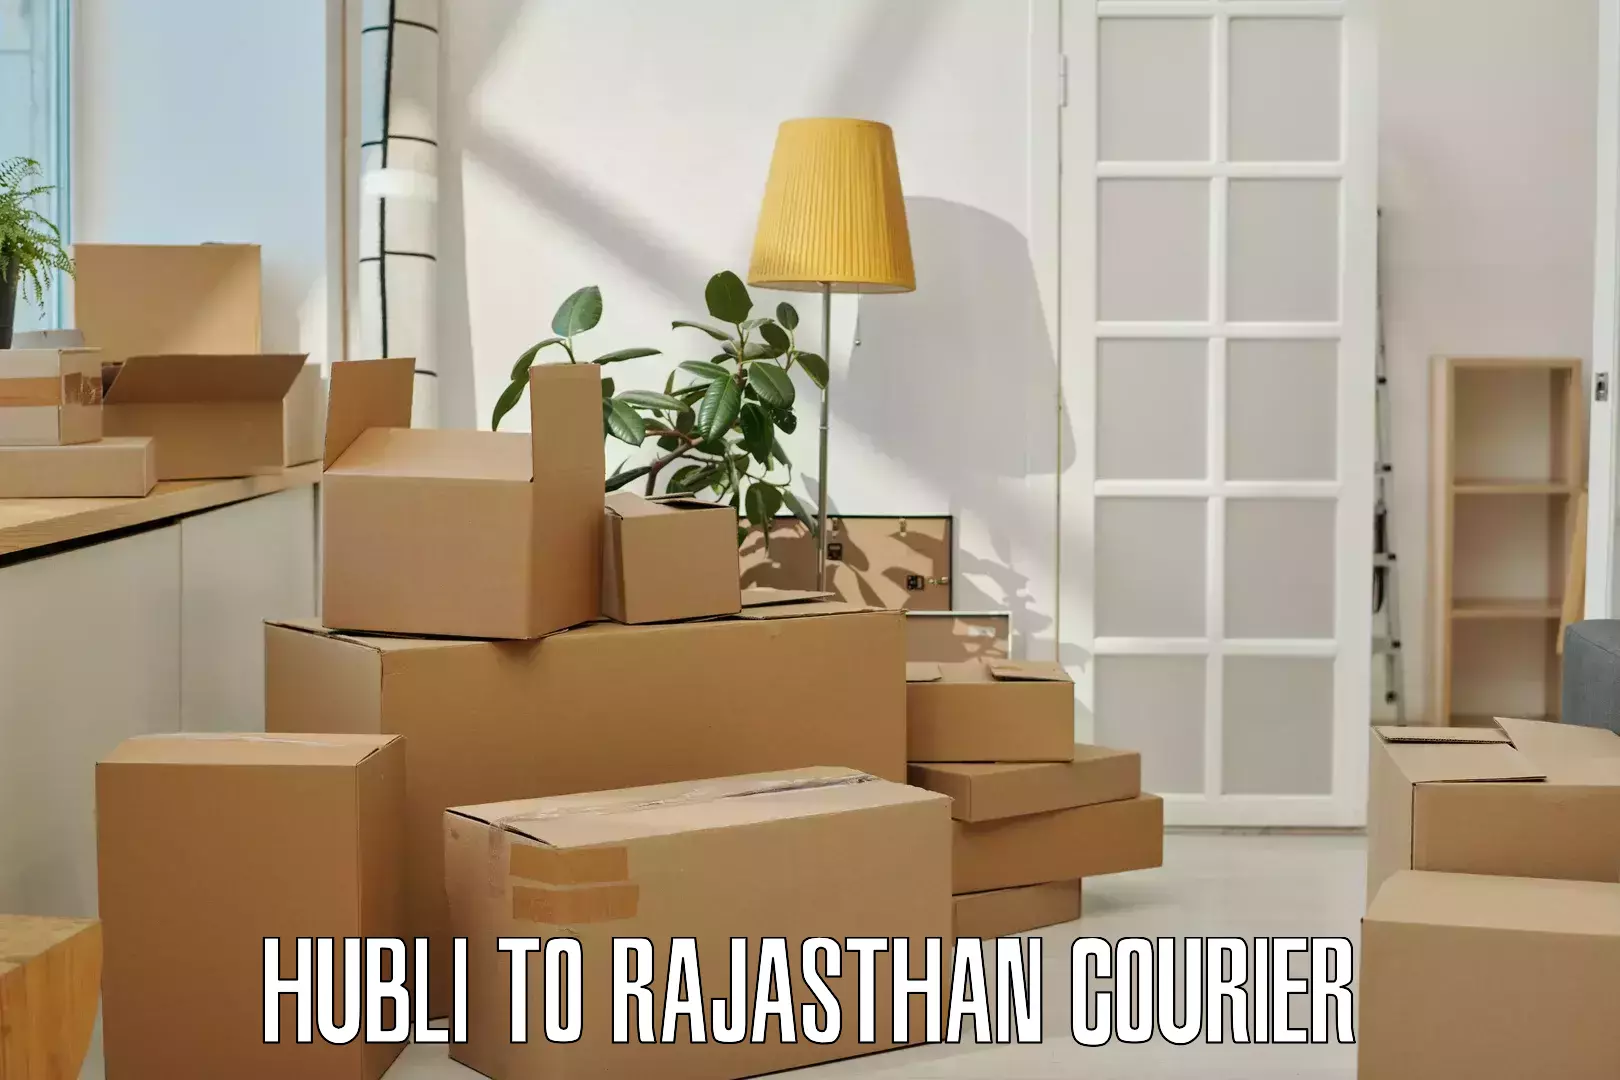 Full-service courier options Hubli to Sultana